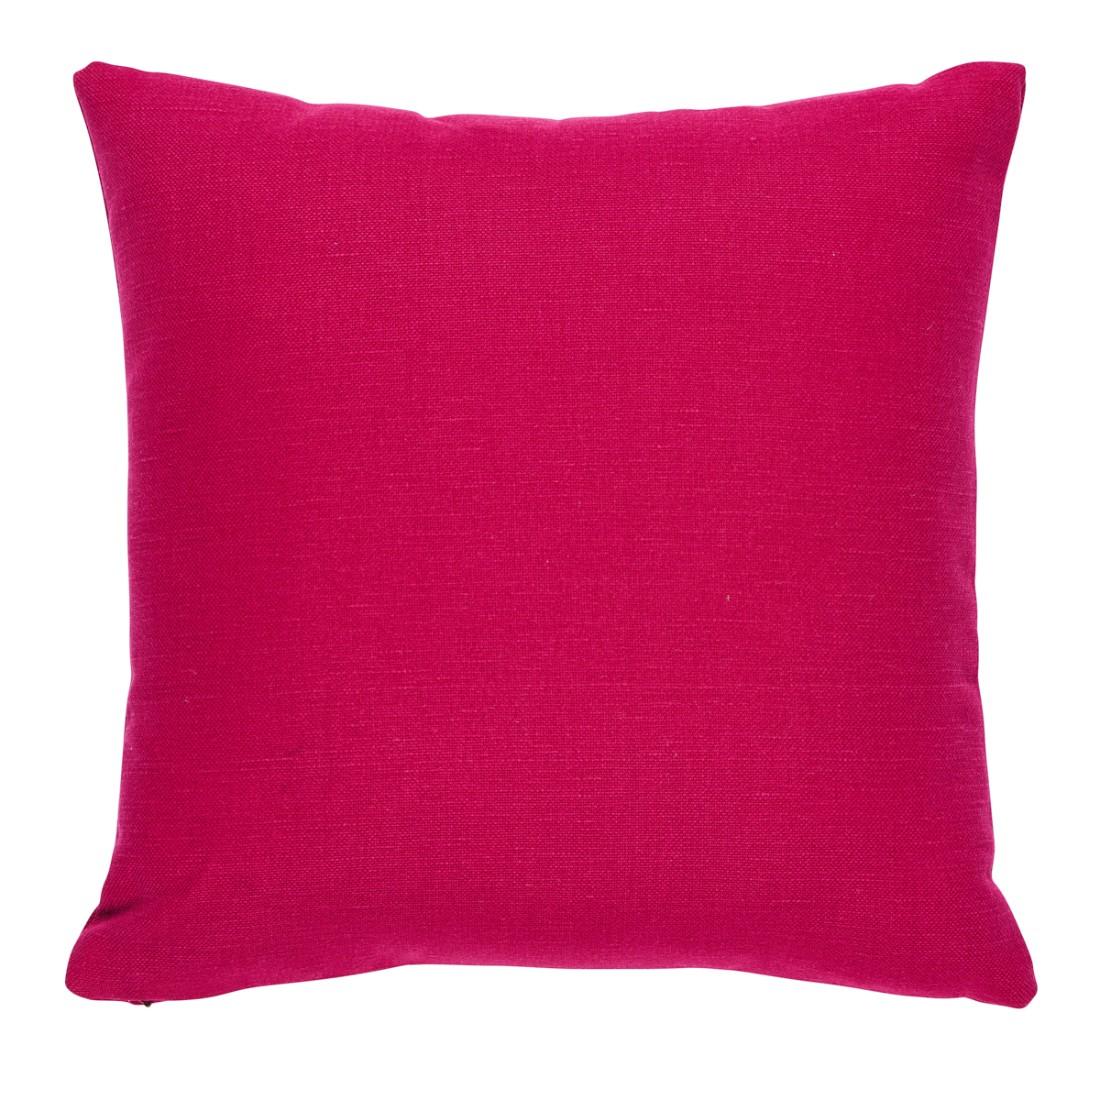 This pillow features Ashoka Tape with a Knife Edge finish. With a winding, embroidered floral design accentuated with French Knots, Ashoka Tape adds an element of handcrafted beauty. Body of pillow is Langham. Pillow includes a feather/down fill